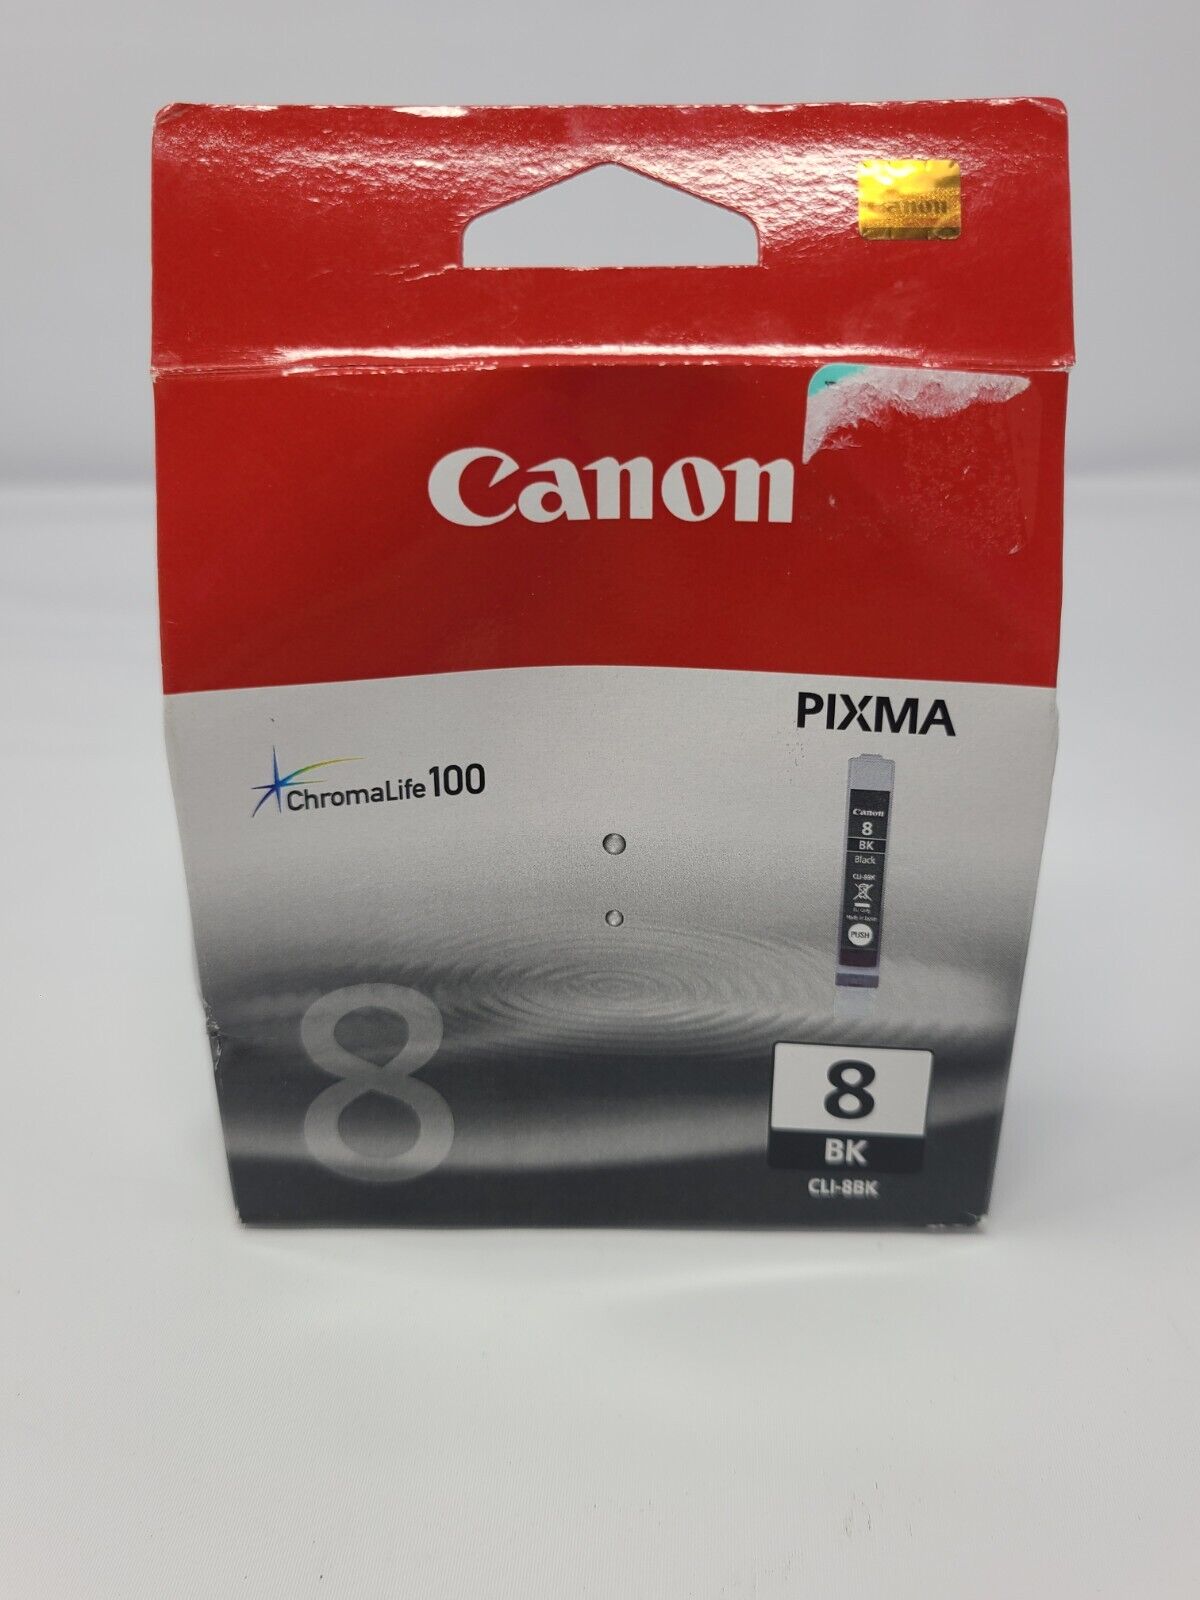 Genuine Canon CLI-8BK Black Ink Tank for use with PIXMA iP4200 - 0620B001